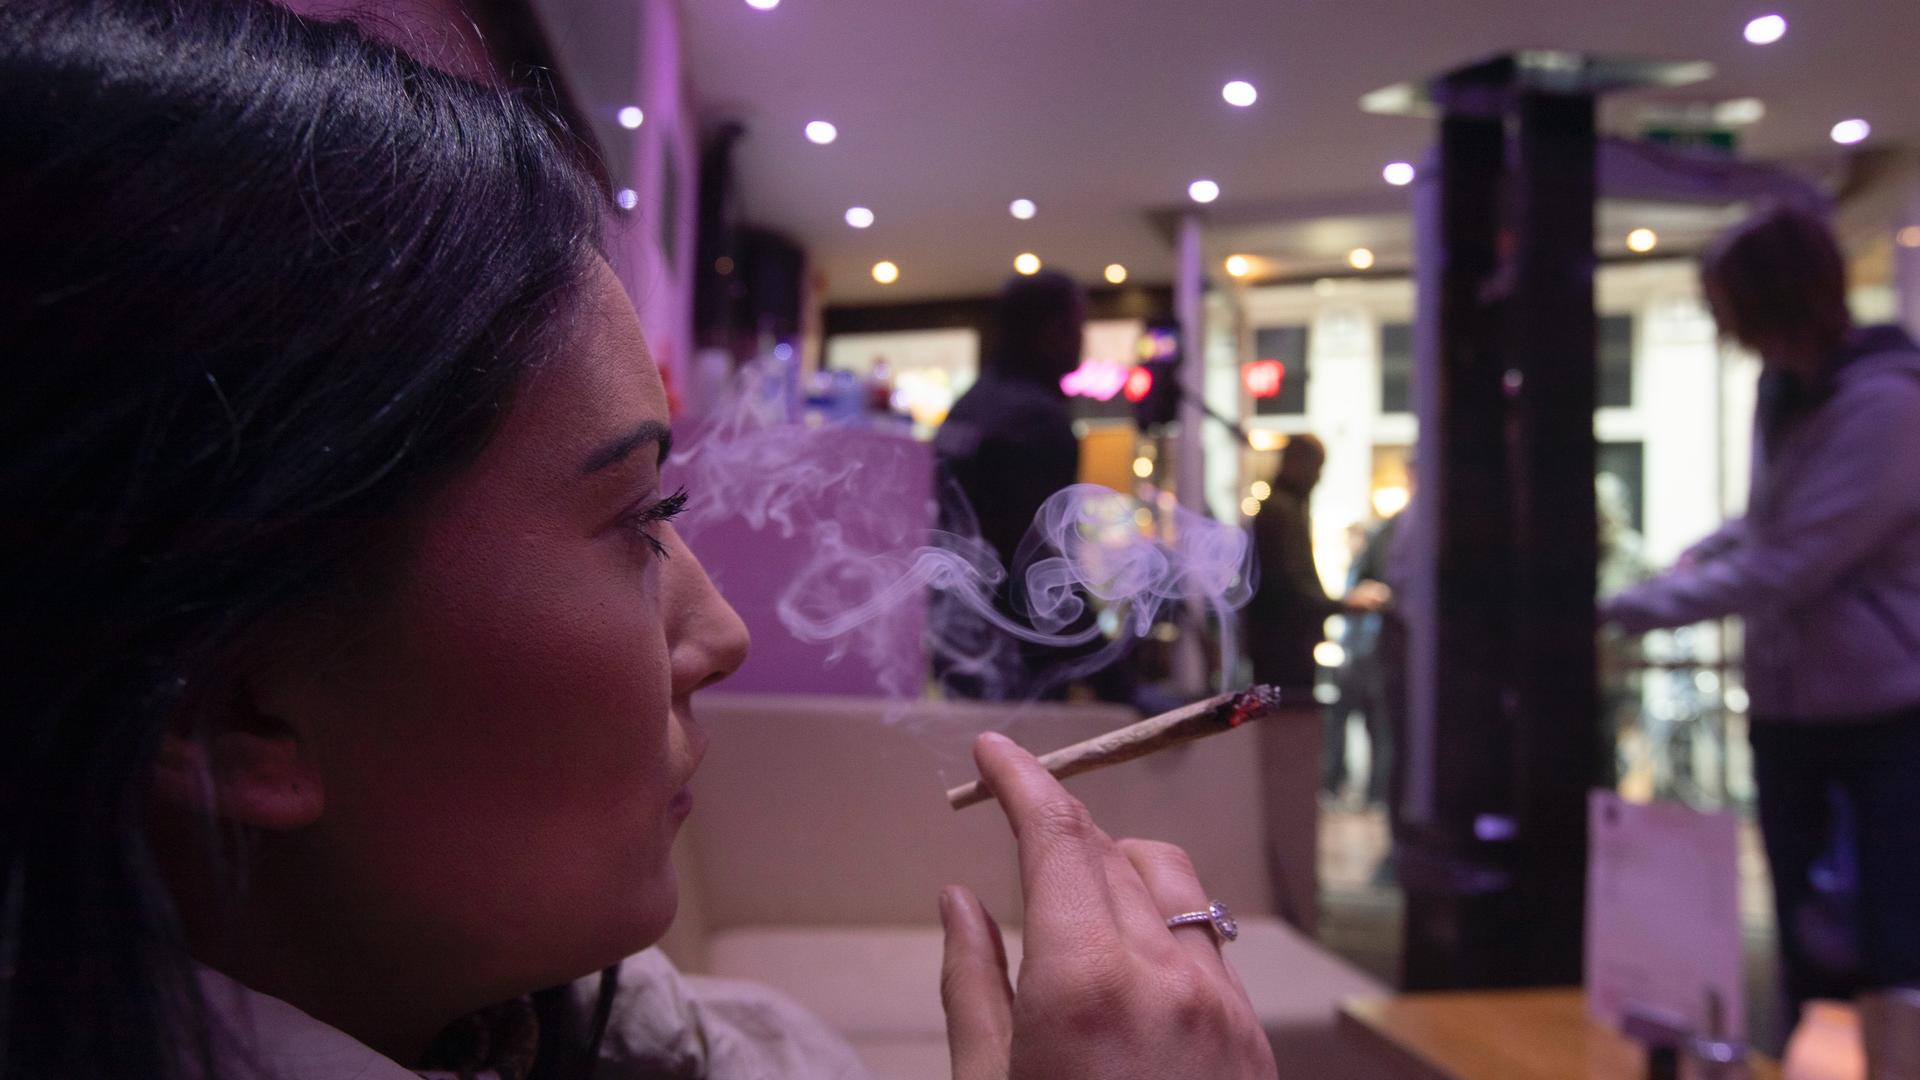 A woman smokes a joint at cannabis coffee shop Prix d'Ami in Amsterdam, Netherlands, March 13, 2020.